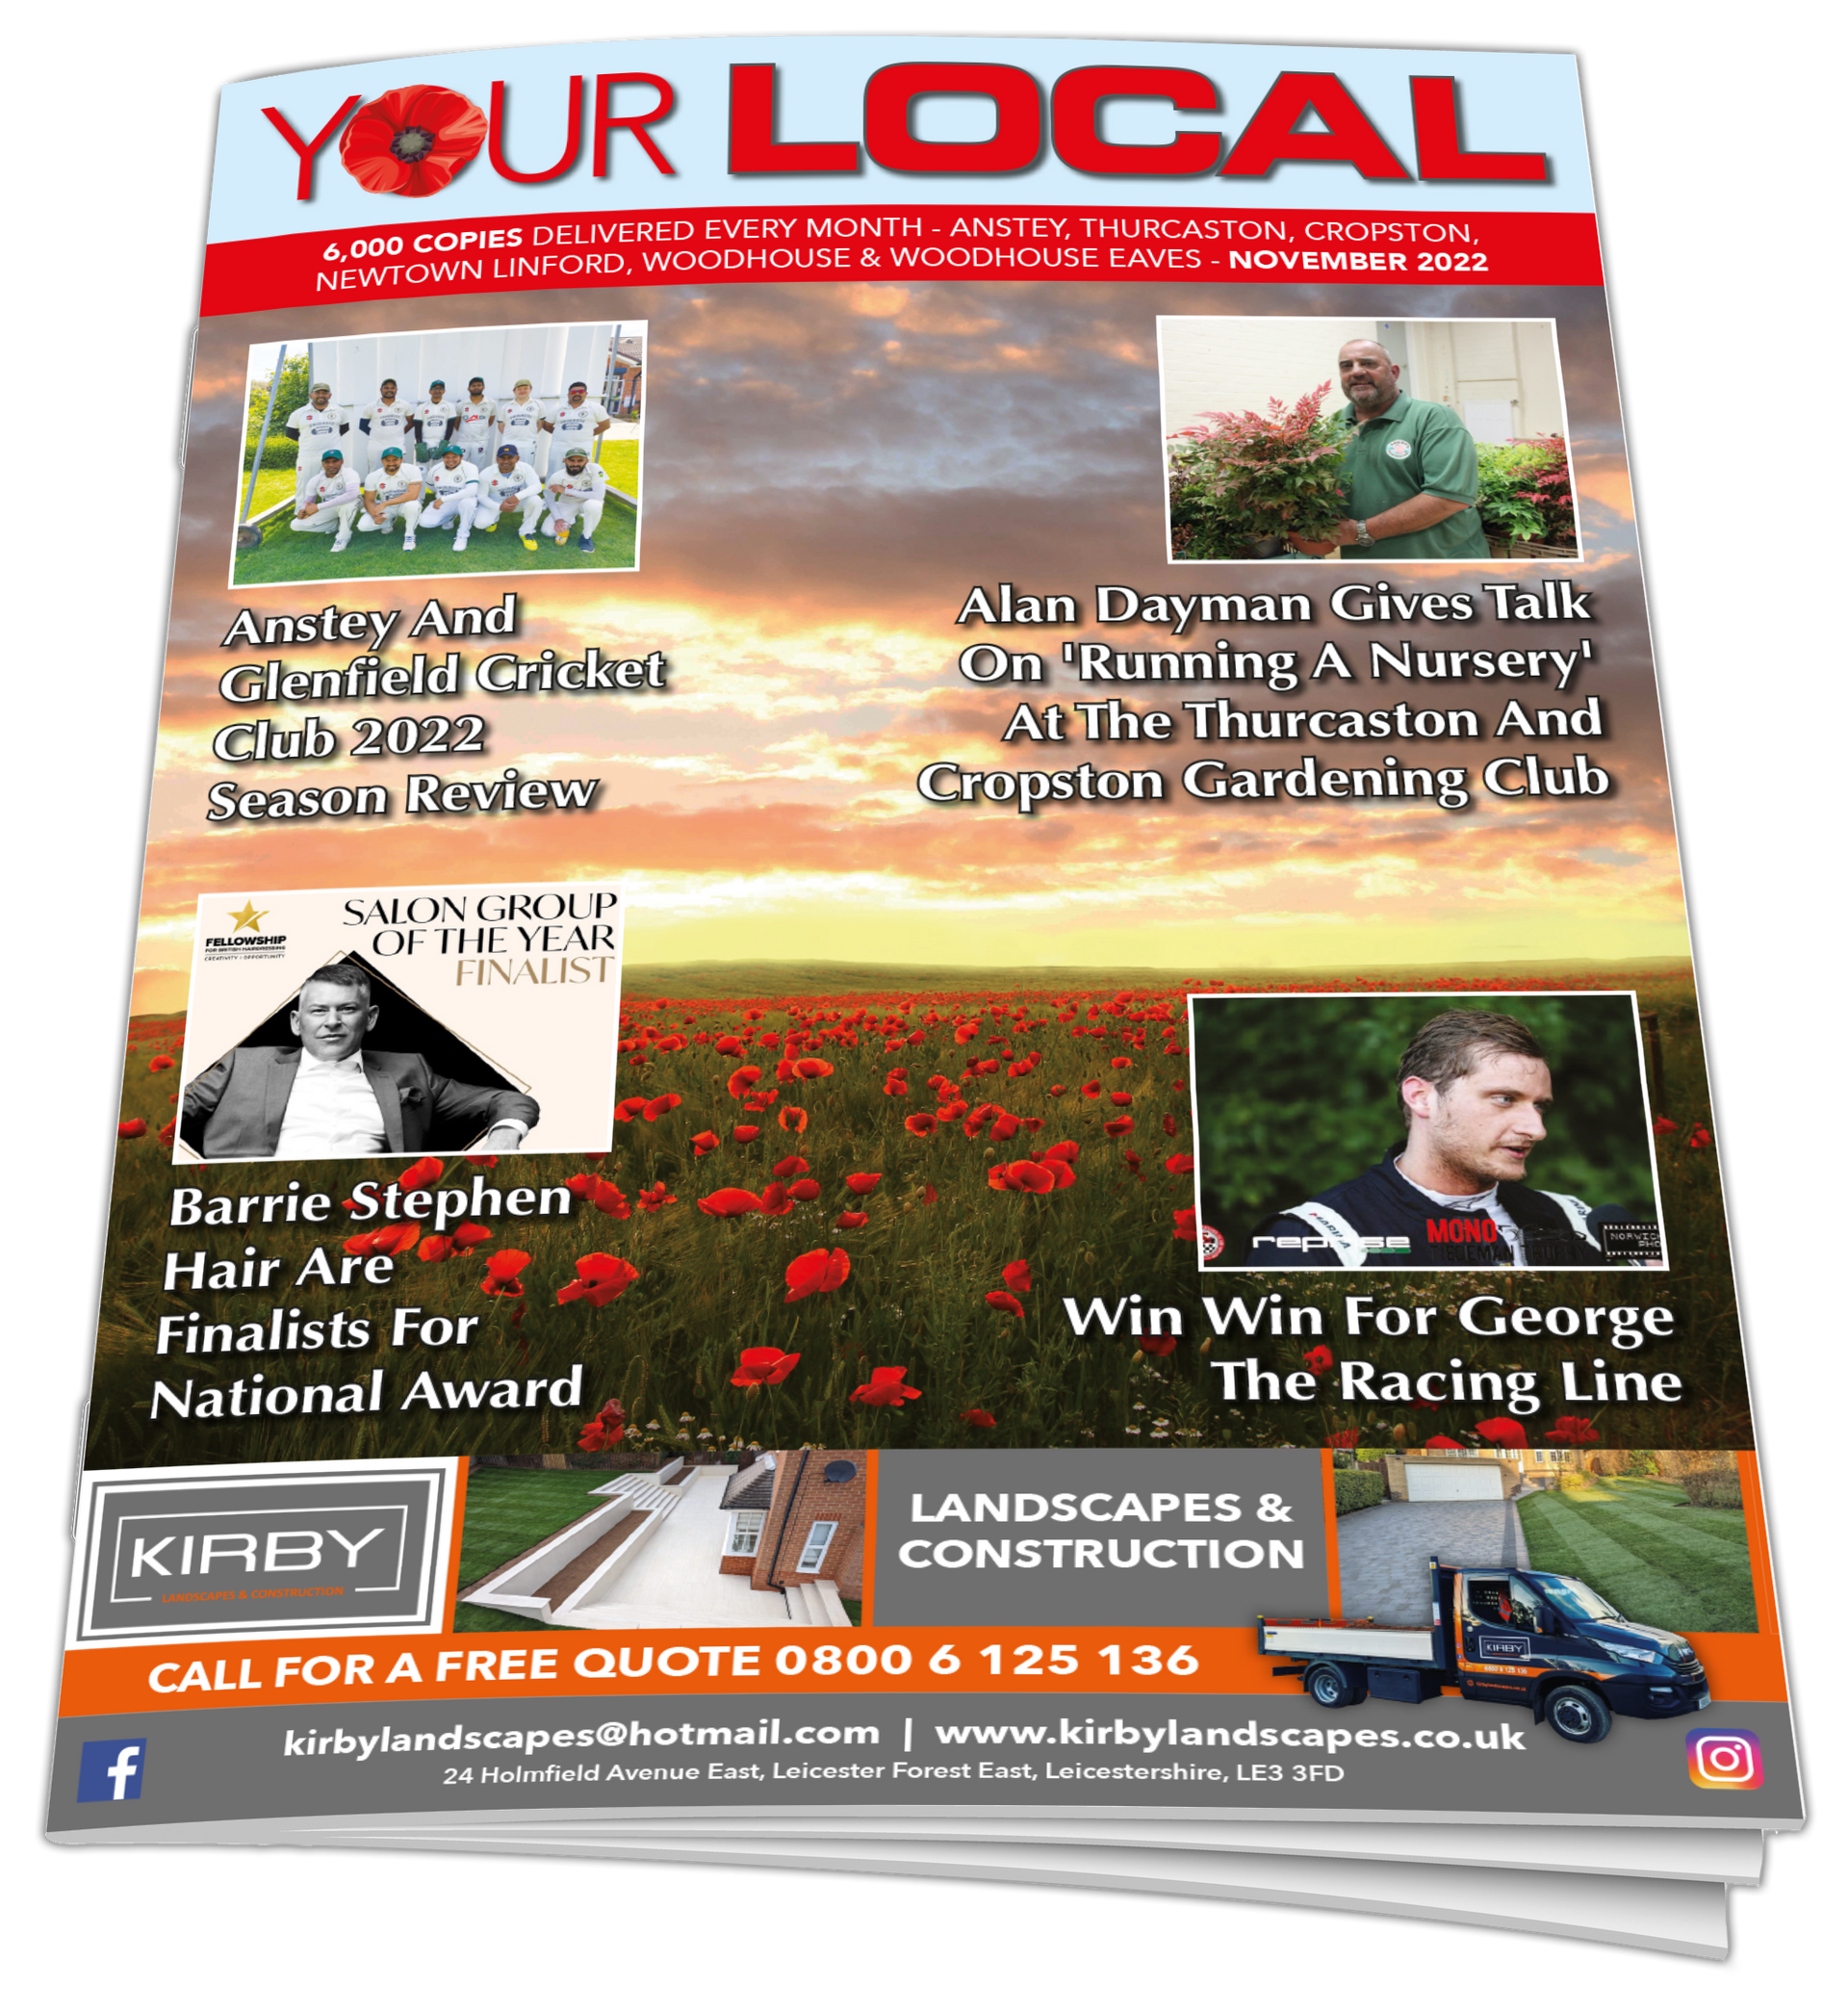 Your Local Magazine Anstey, Thurcaston, Cropston, Newtown Linford, Woodhouse & Woodhouse Eaves